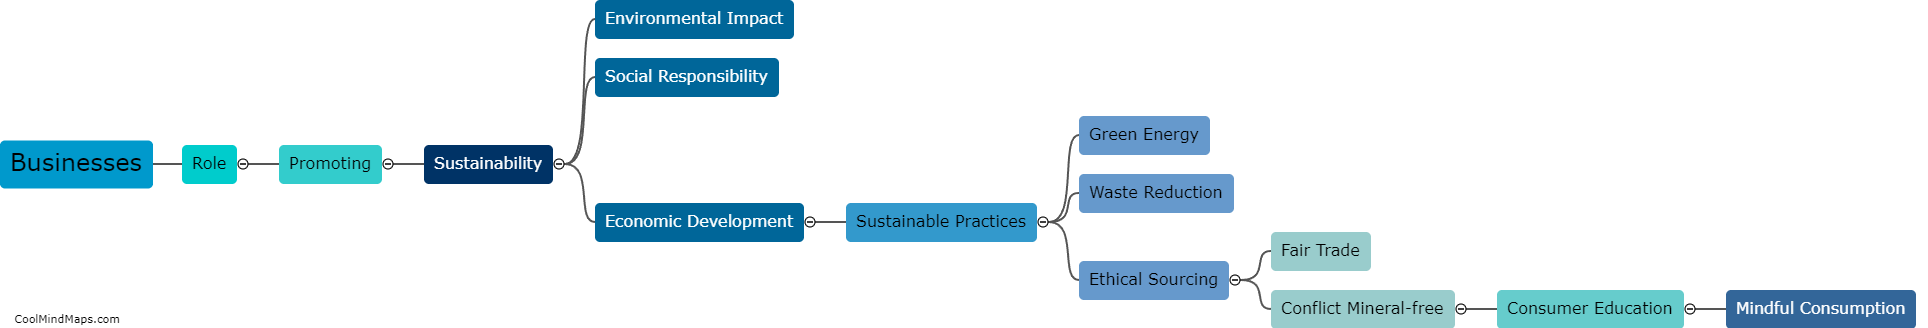 What is the role of businesses in promoting sustainability?